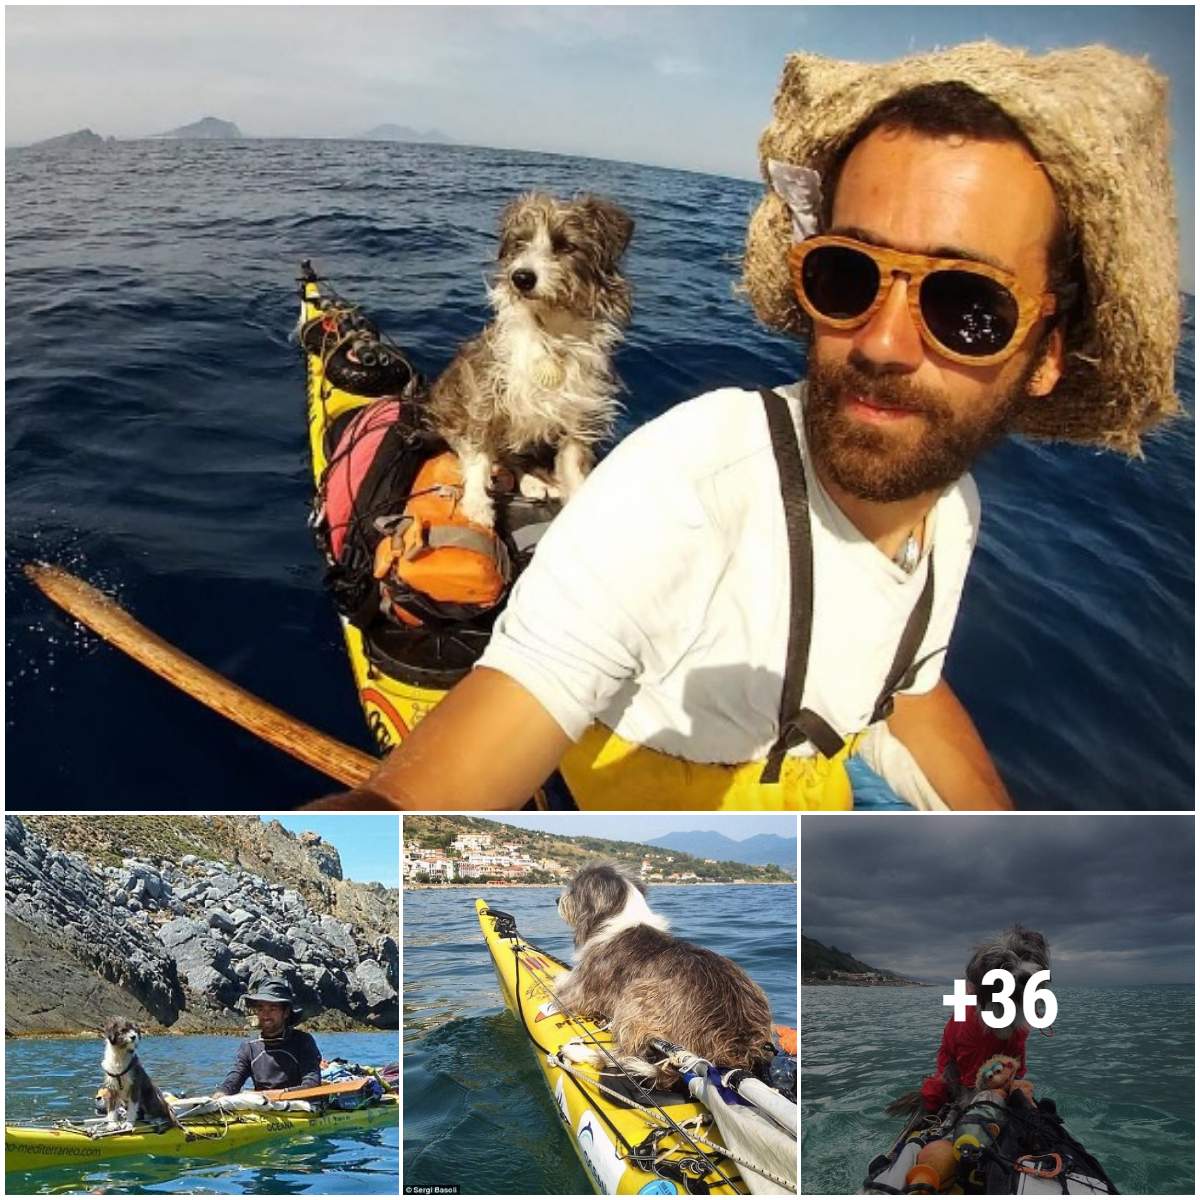 An Incredible Adventure Follow the journey of a dog and his owner as they explore beautiful islands on their small boat.